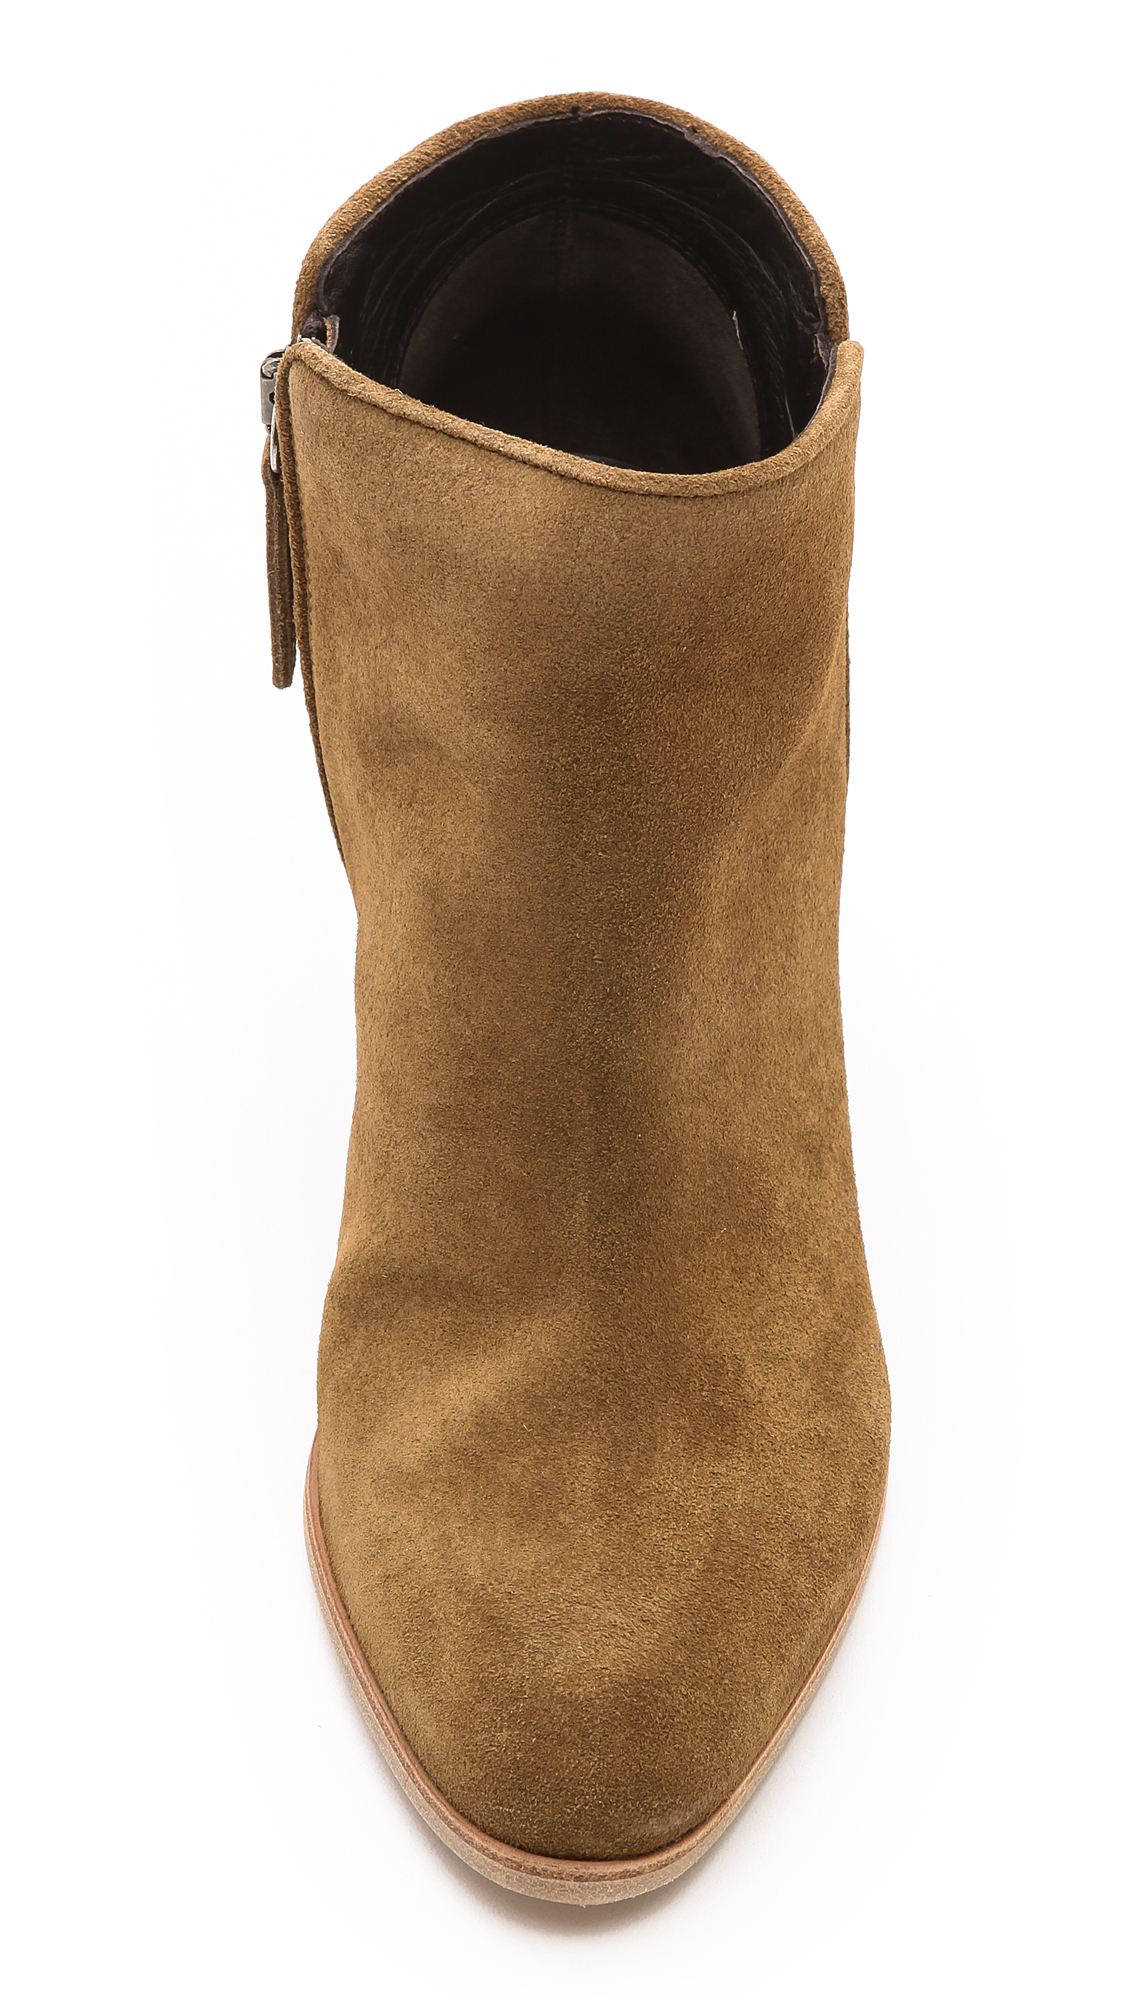 Giuseppe zanotti Suede Booties in Brown | Lyst